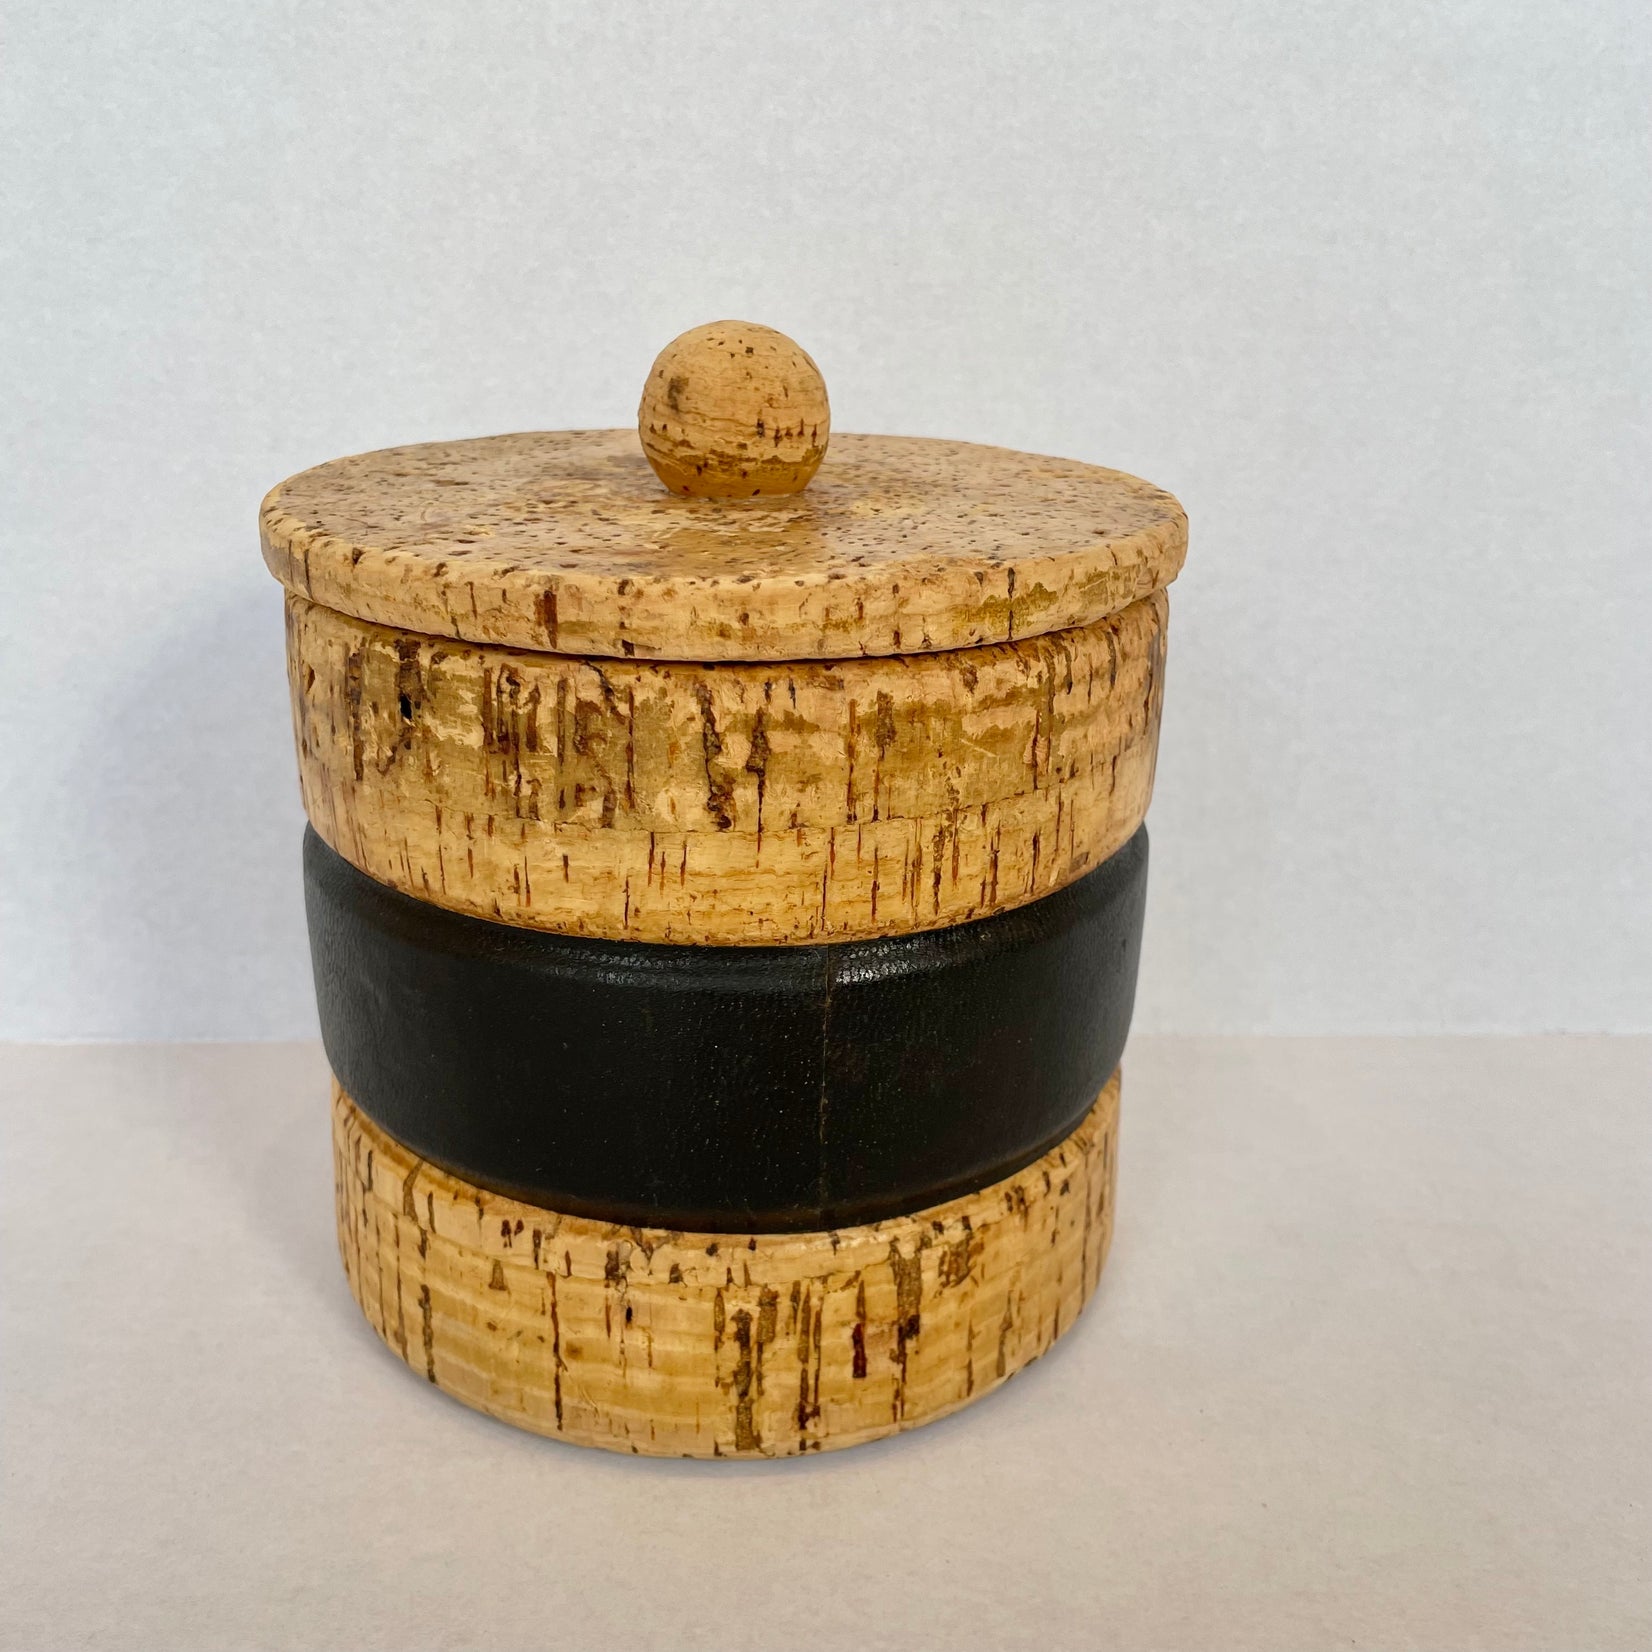 Dunhill Cork and Leather Tobacco Jar, 1950s England